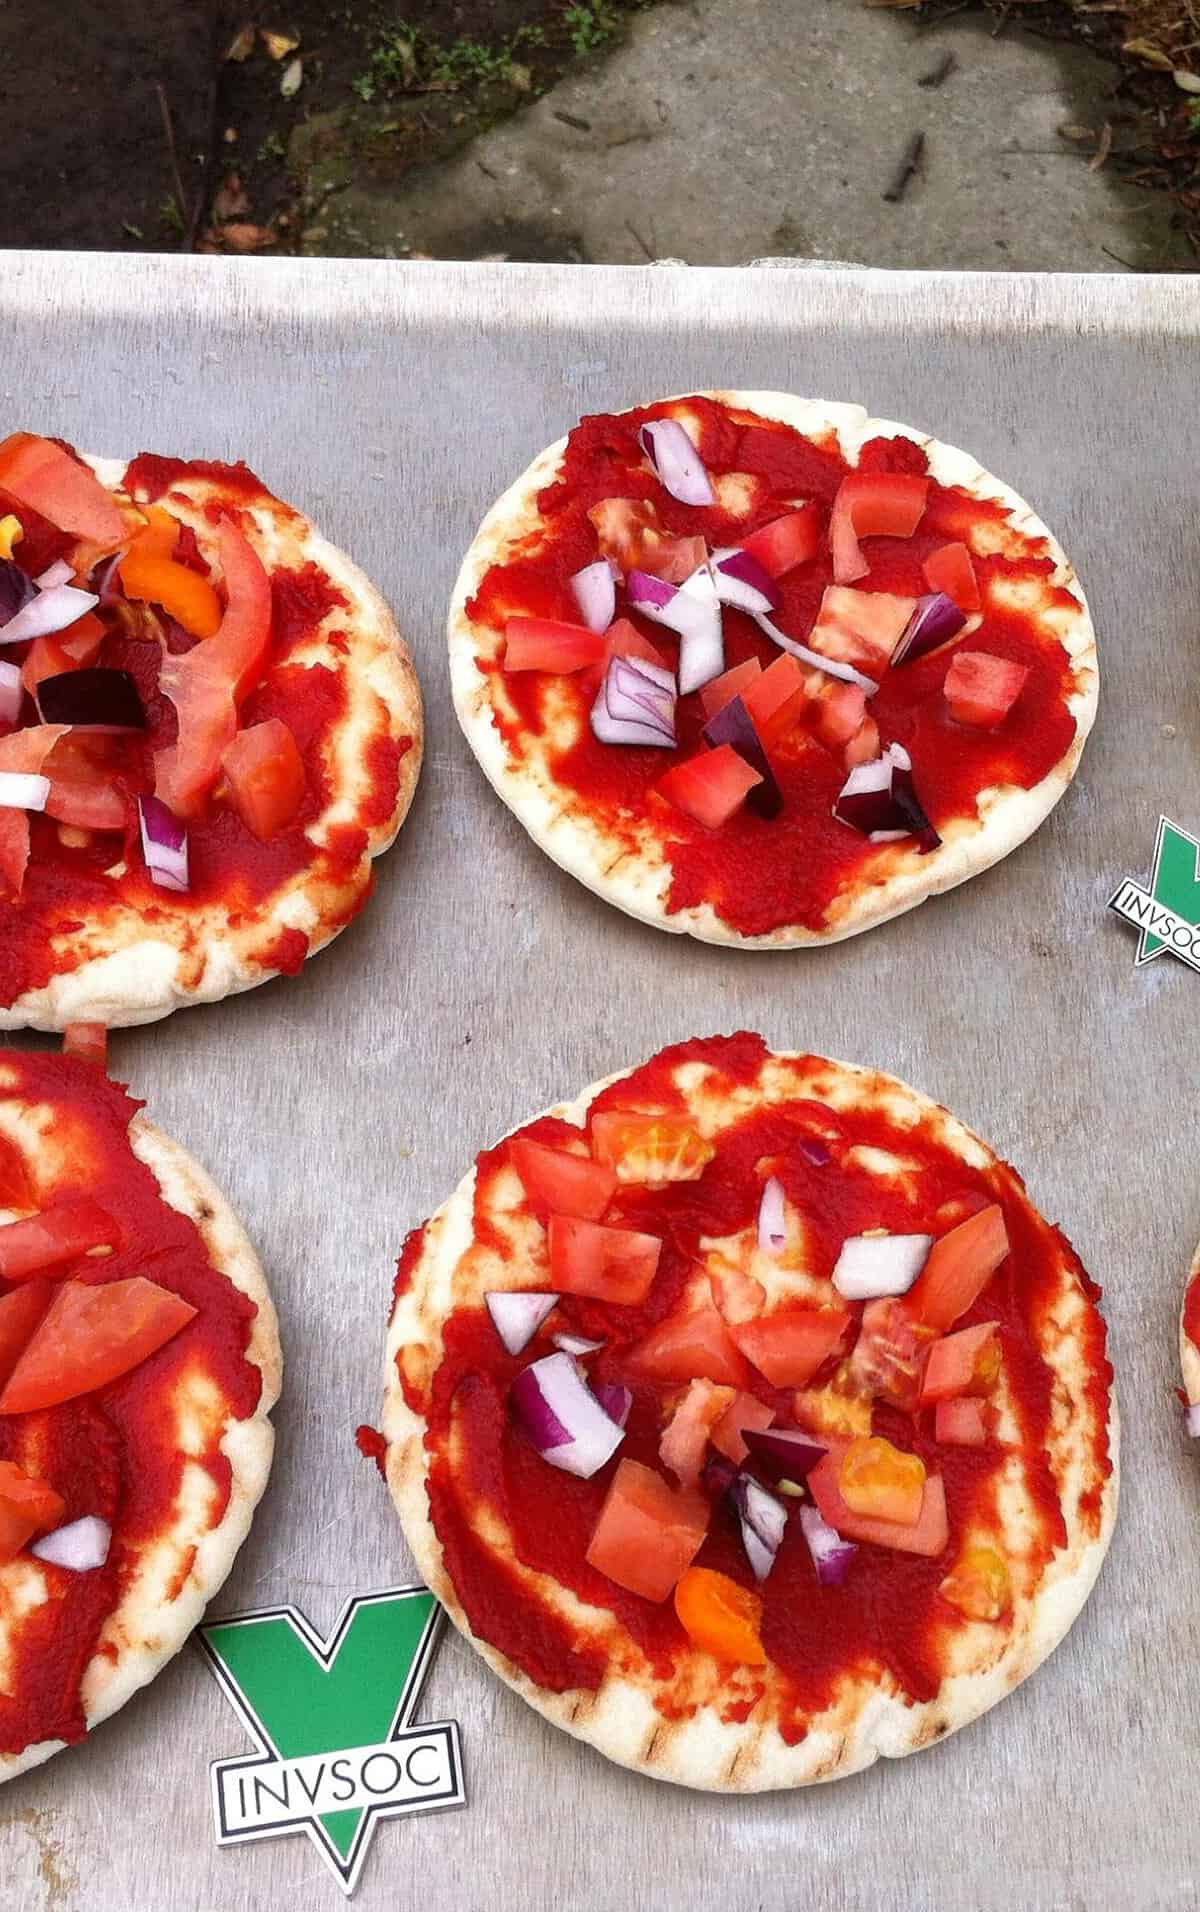  Bite into the flavor explosion of these colorful pita pizzas!